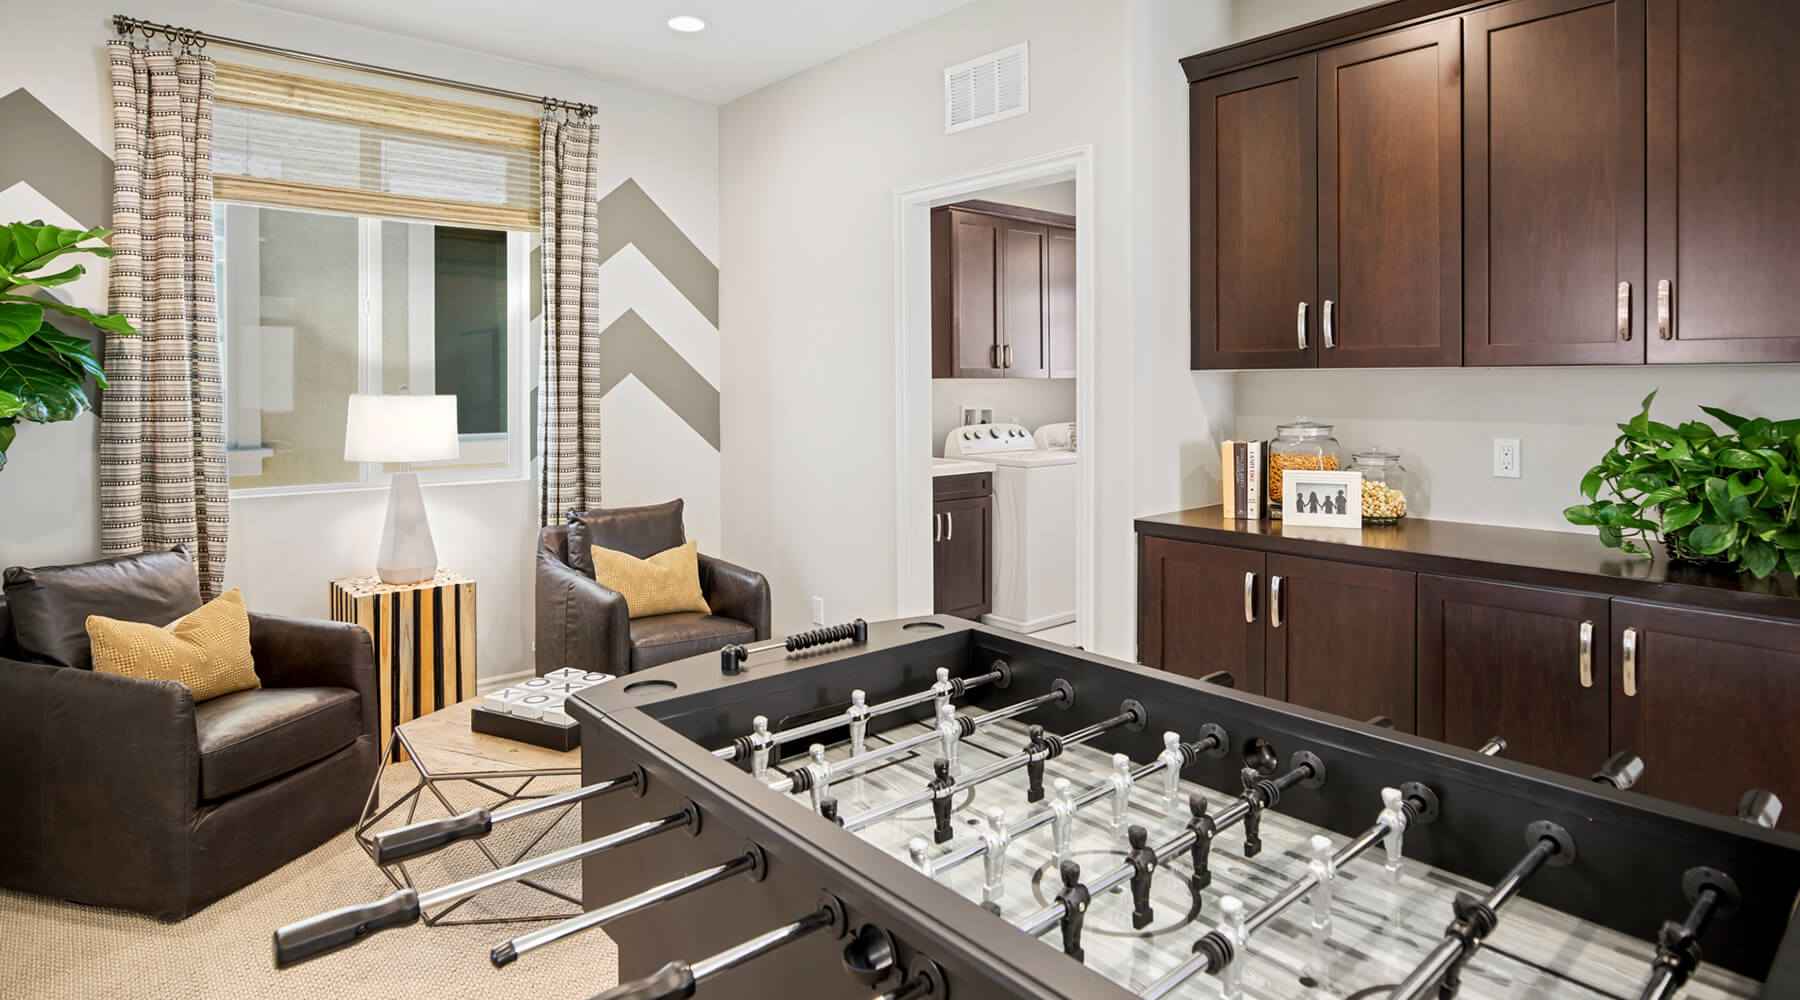 Game room at Avila new townhomes for sale